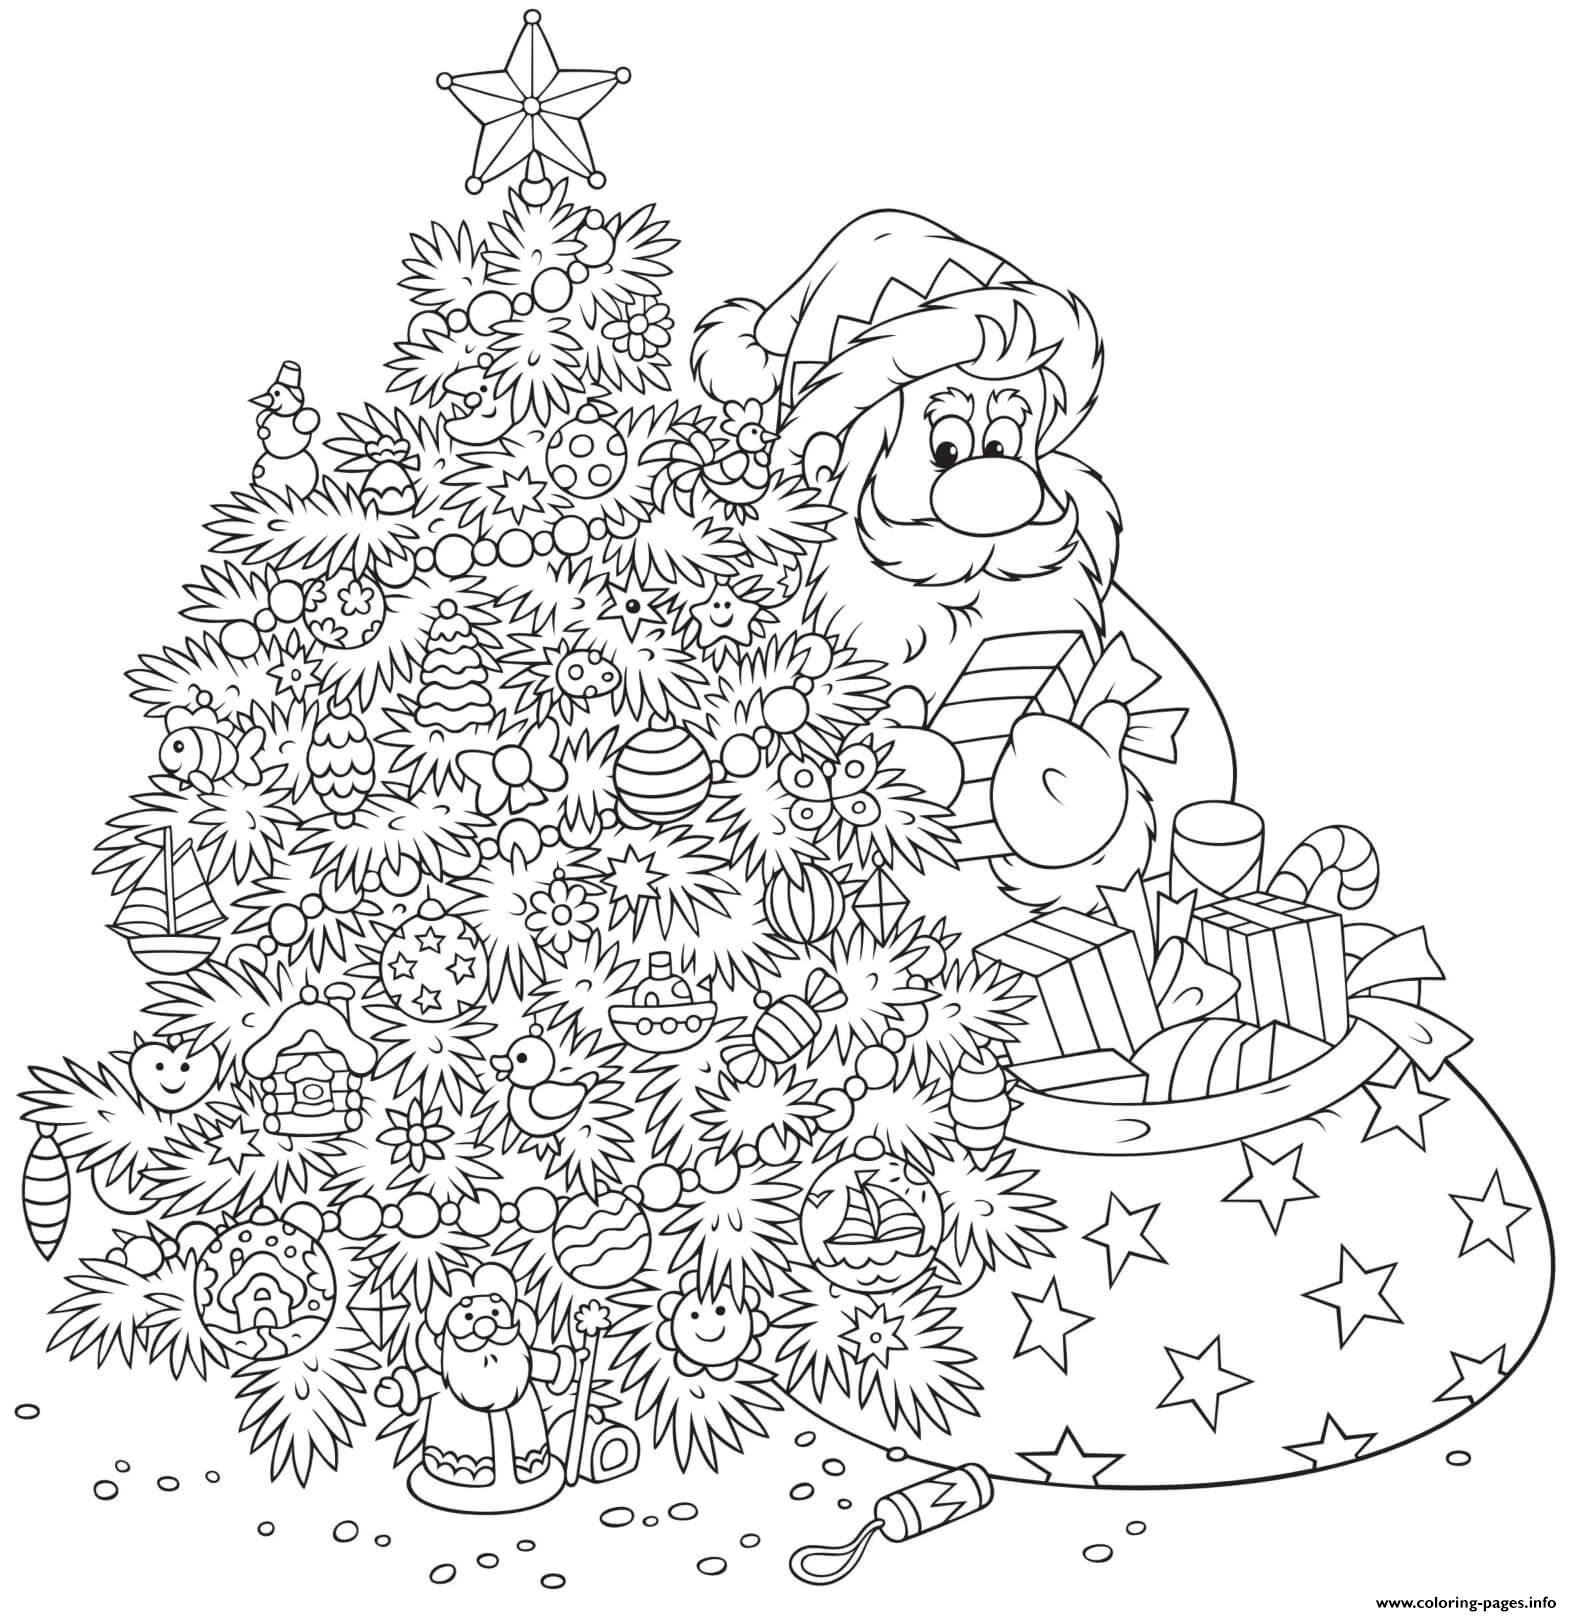 Christmas For Adults Decorated Tree Santa Delivering Gifts coloring